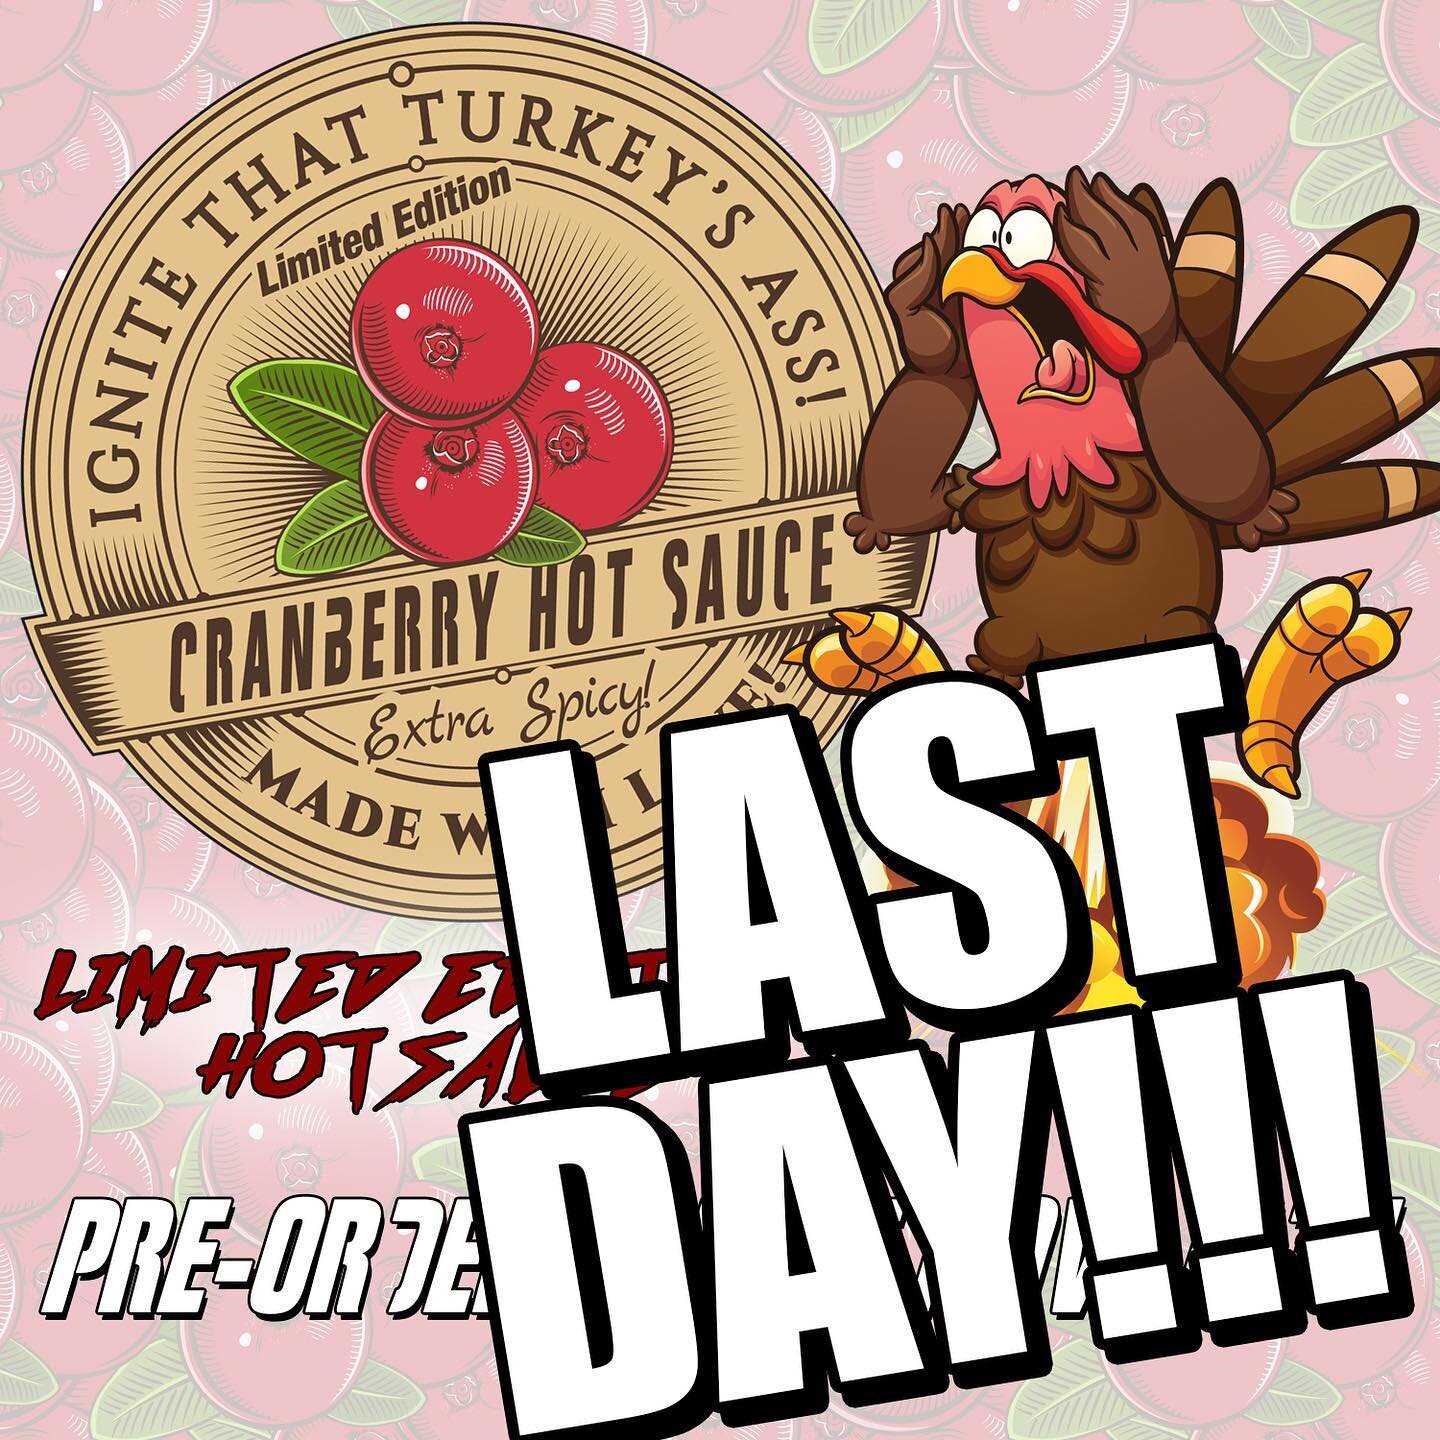 CLOSES AT MIDNIGHT! Once it's gone...it's gone! 

www.BITECLUBNOMS.com